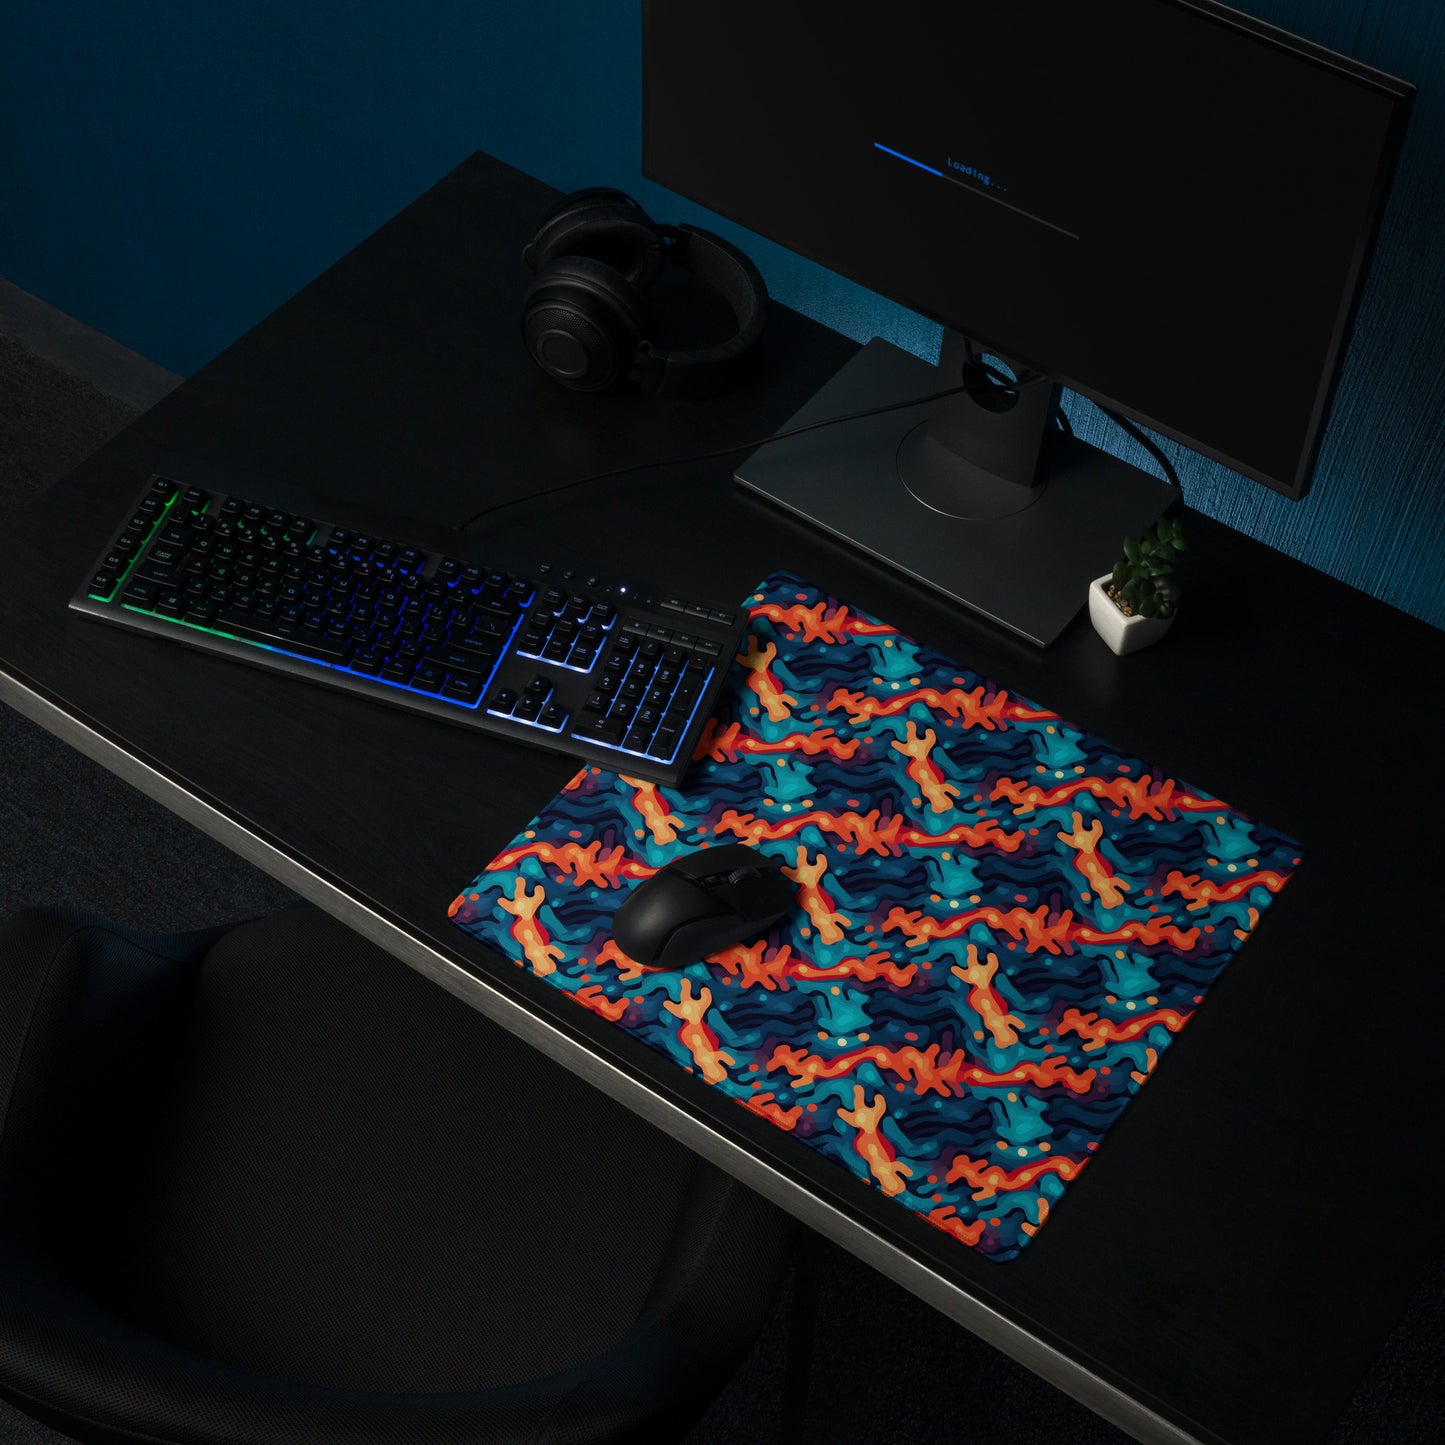 A 18" x 16" desk pad with a wavy woven pattern on it shown on a desk setup. Red and Blue in color.